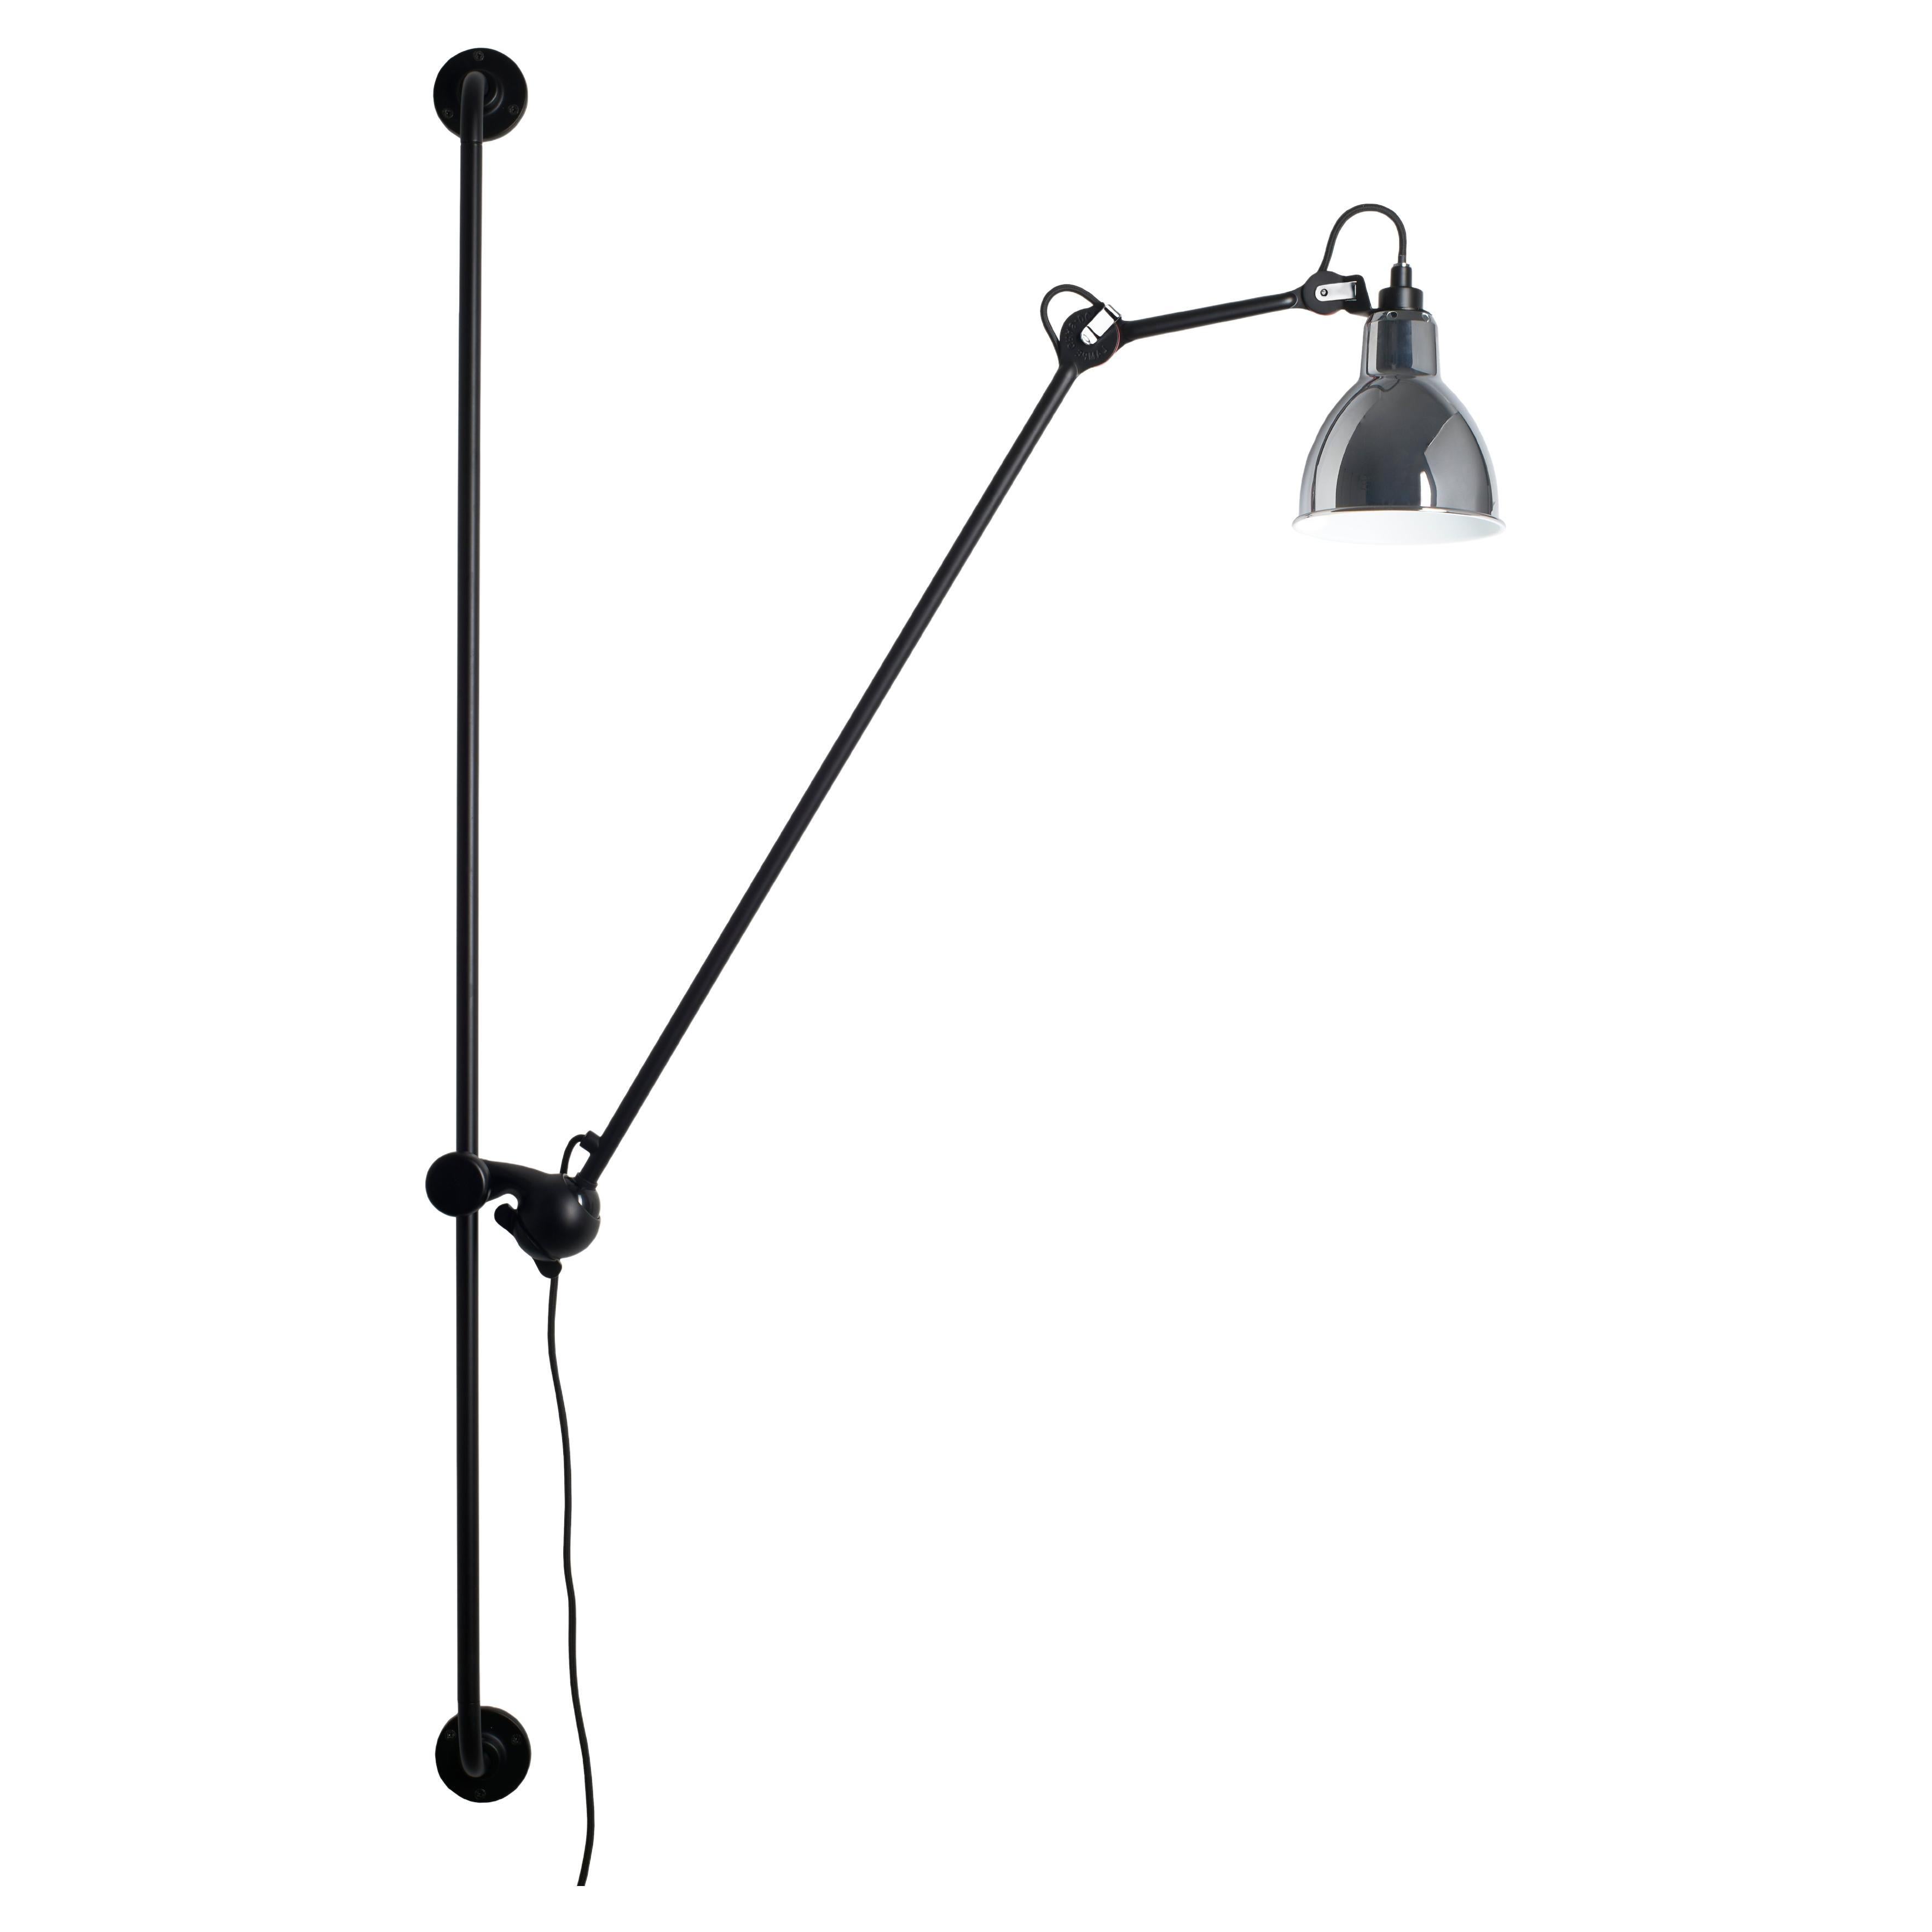 DCW Editions La Lampe Gras N°214 Round Wall Lamp in Black Arm and Chrome Shade